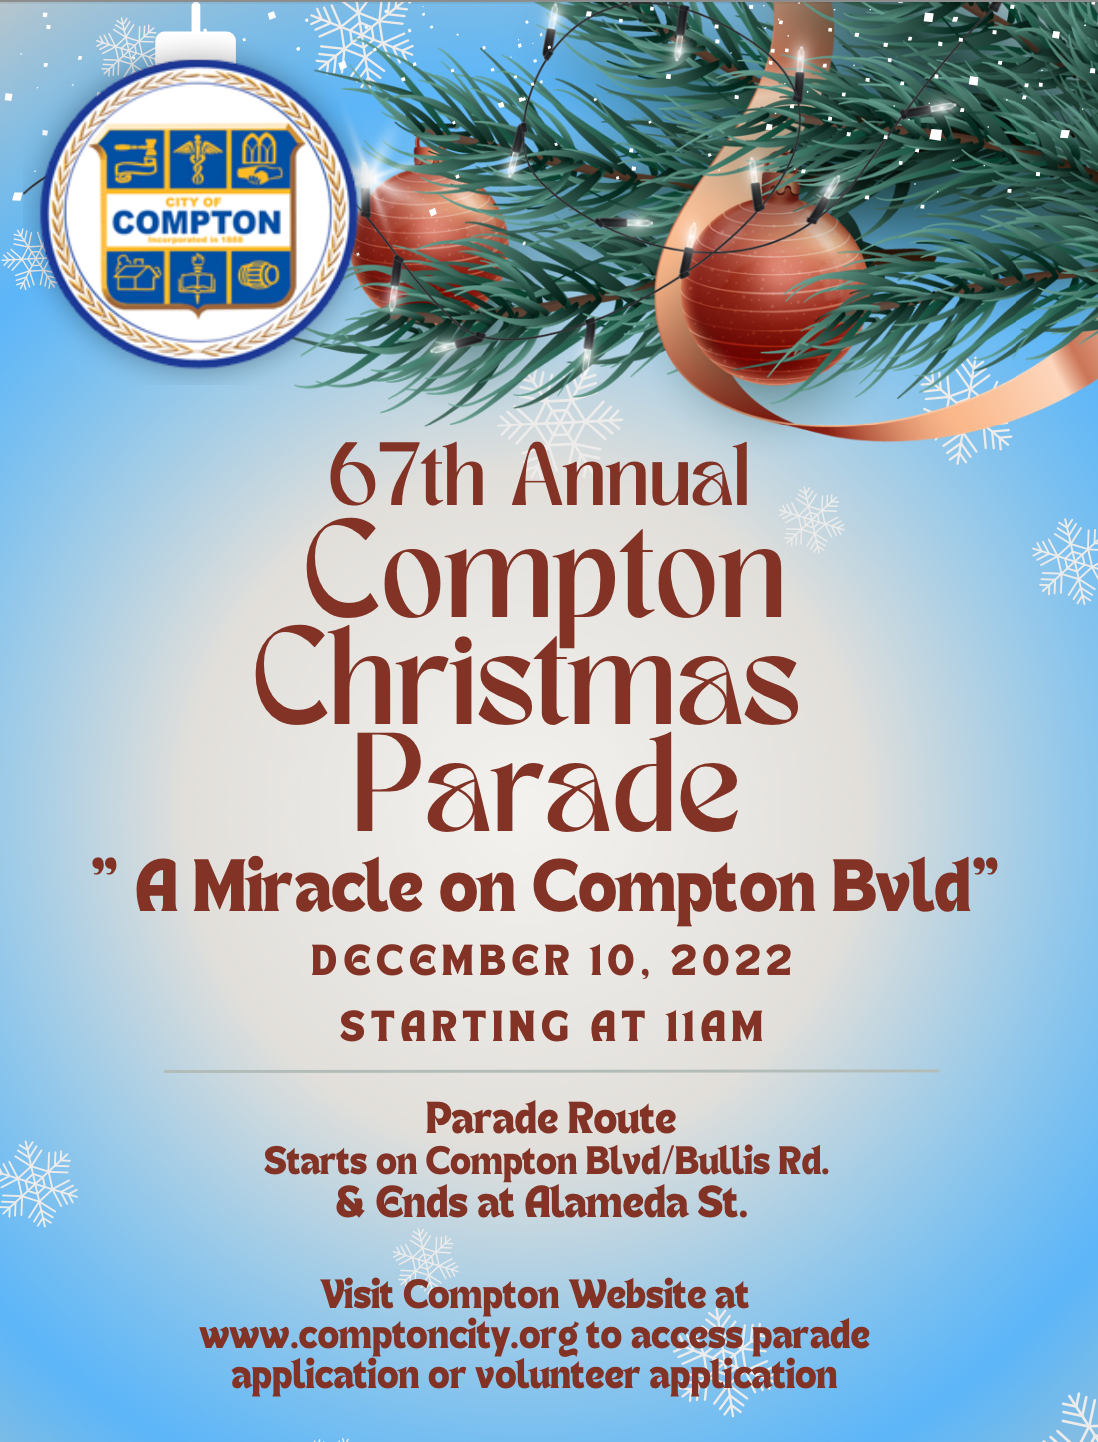 The image is advertising the Compton Parade "A Miracle on Compton Blvd"